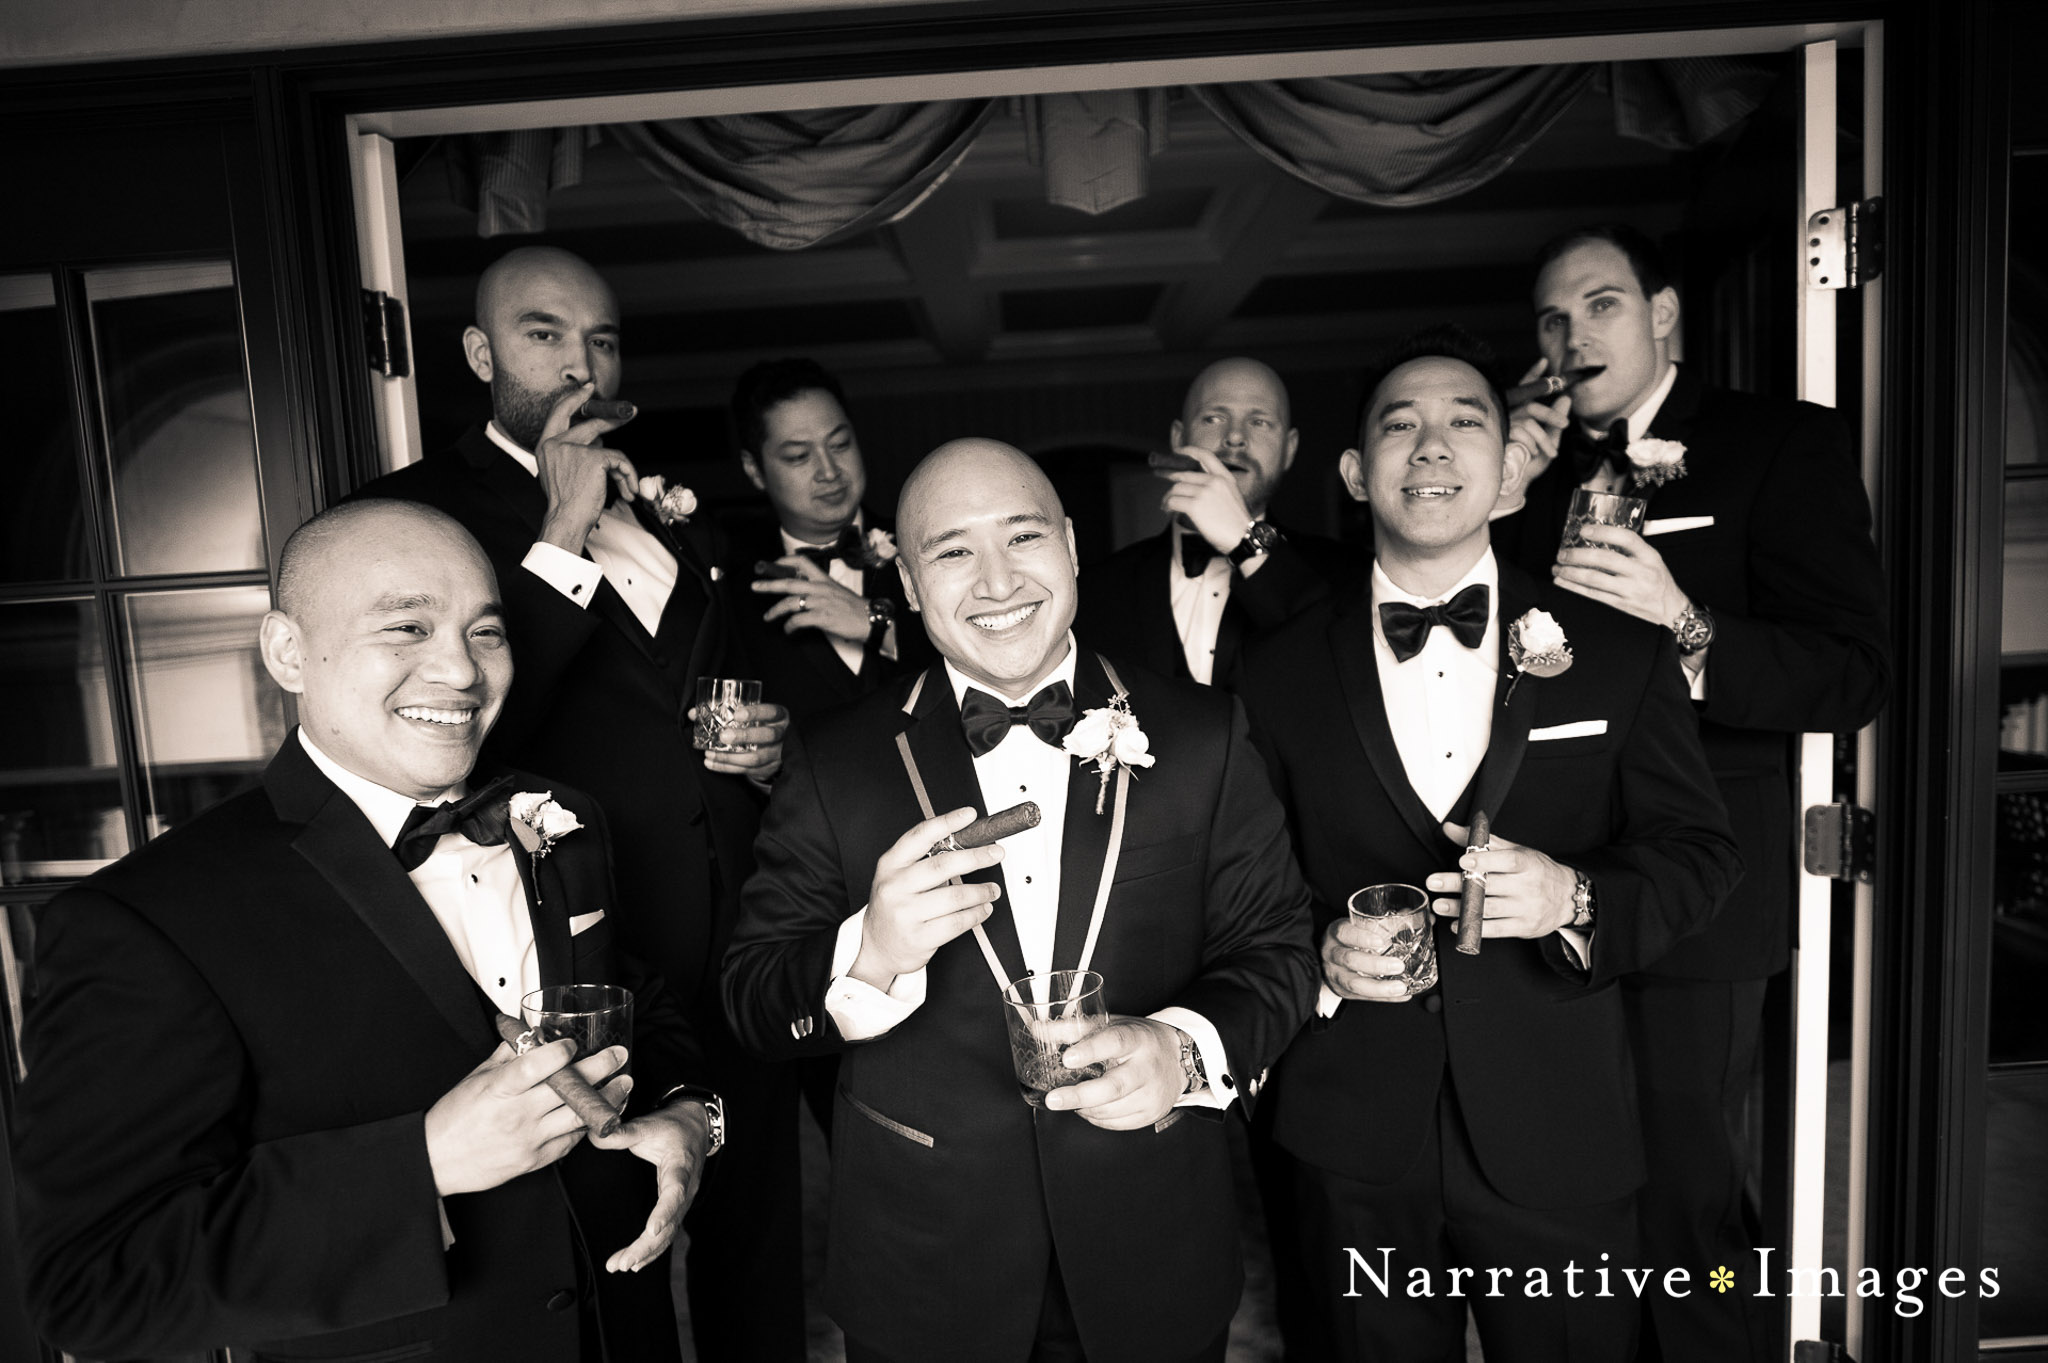 Wedding photo from the grand del marl hotel classic style black tie groomsmen hold cigars and whisky